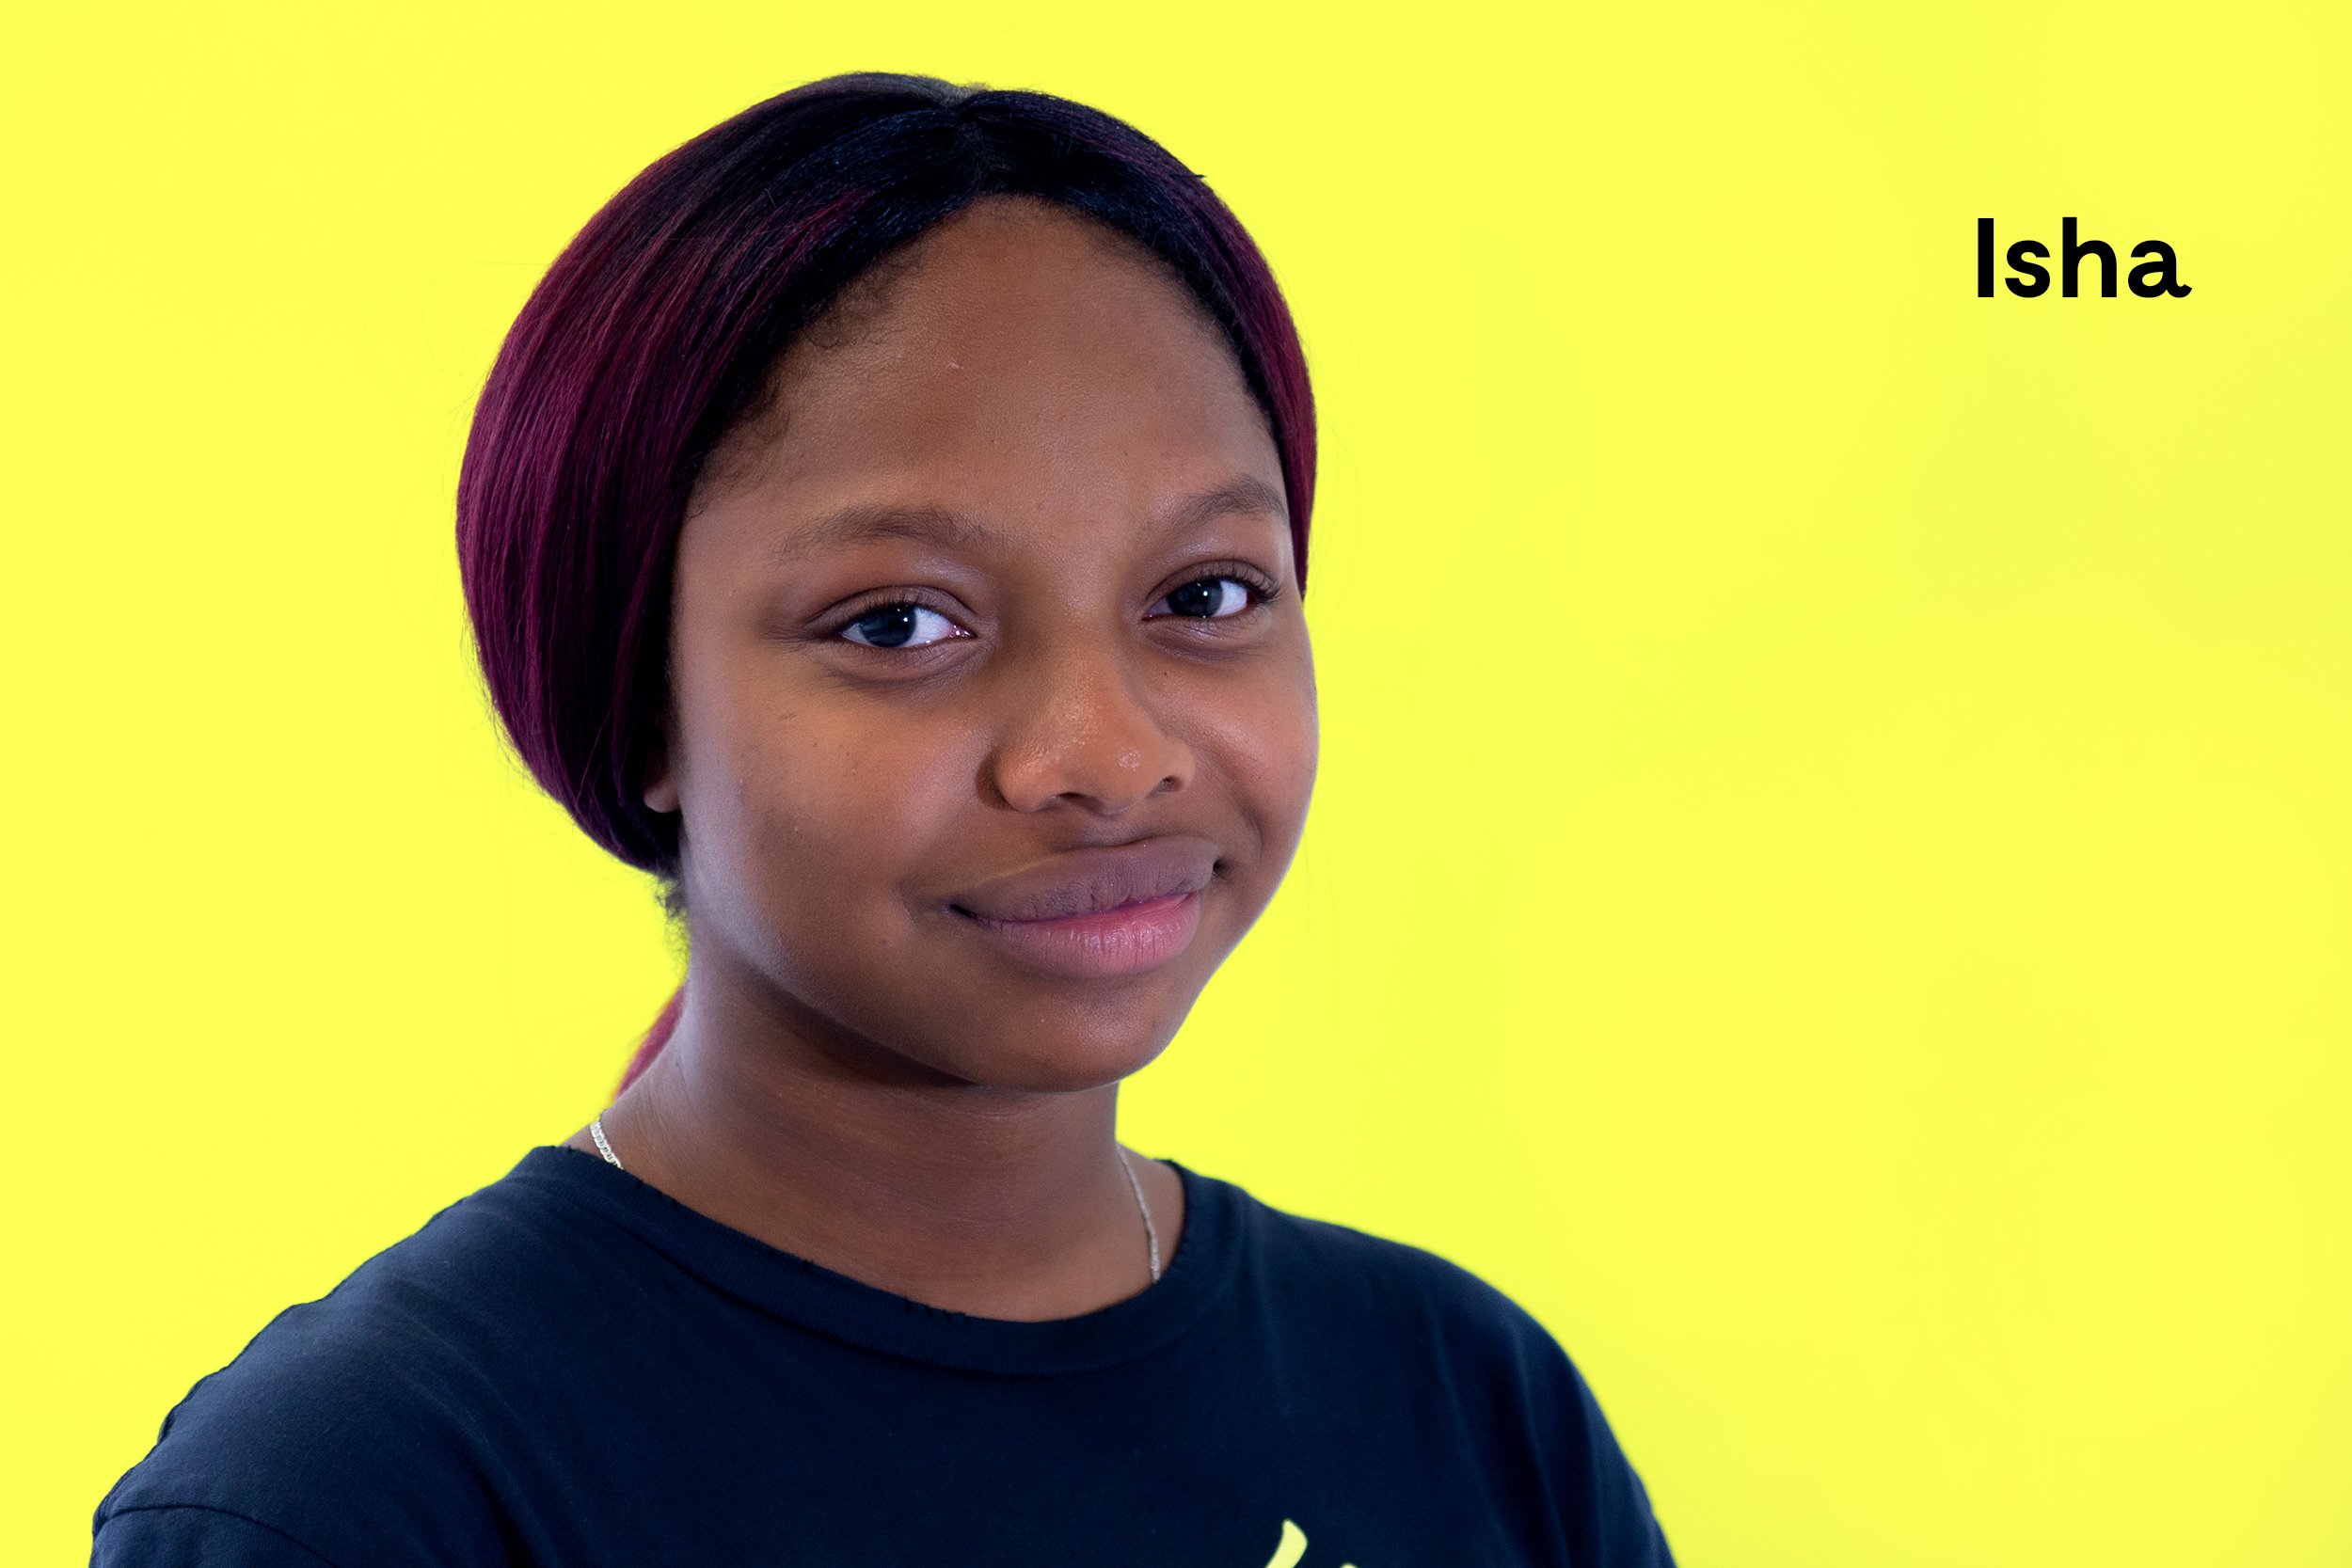  Isha Sheriff (b. 2006) is a 10th grader with a passion for art, baking and basketball. She loves and is proud of her Sierra Leonean heritage because it is a little-known culture in Québec. 